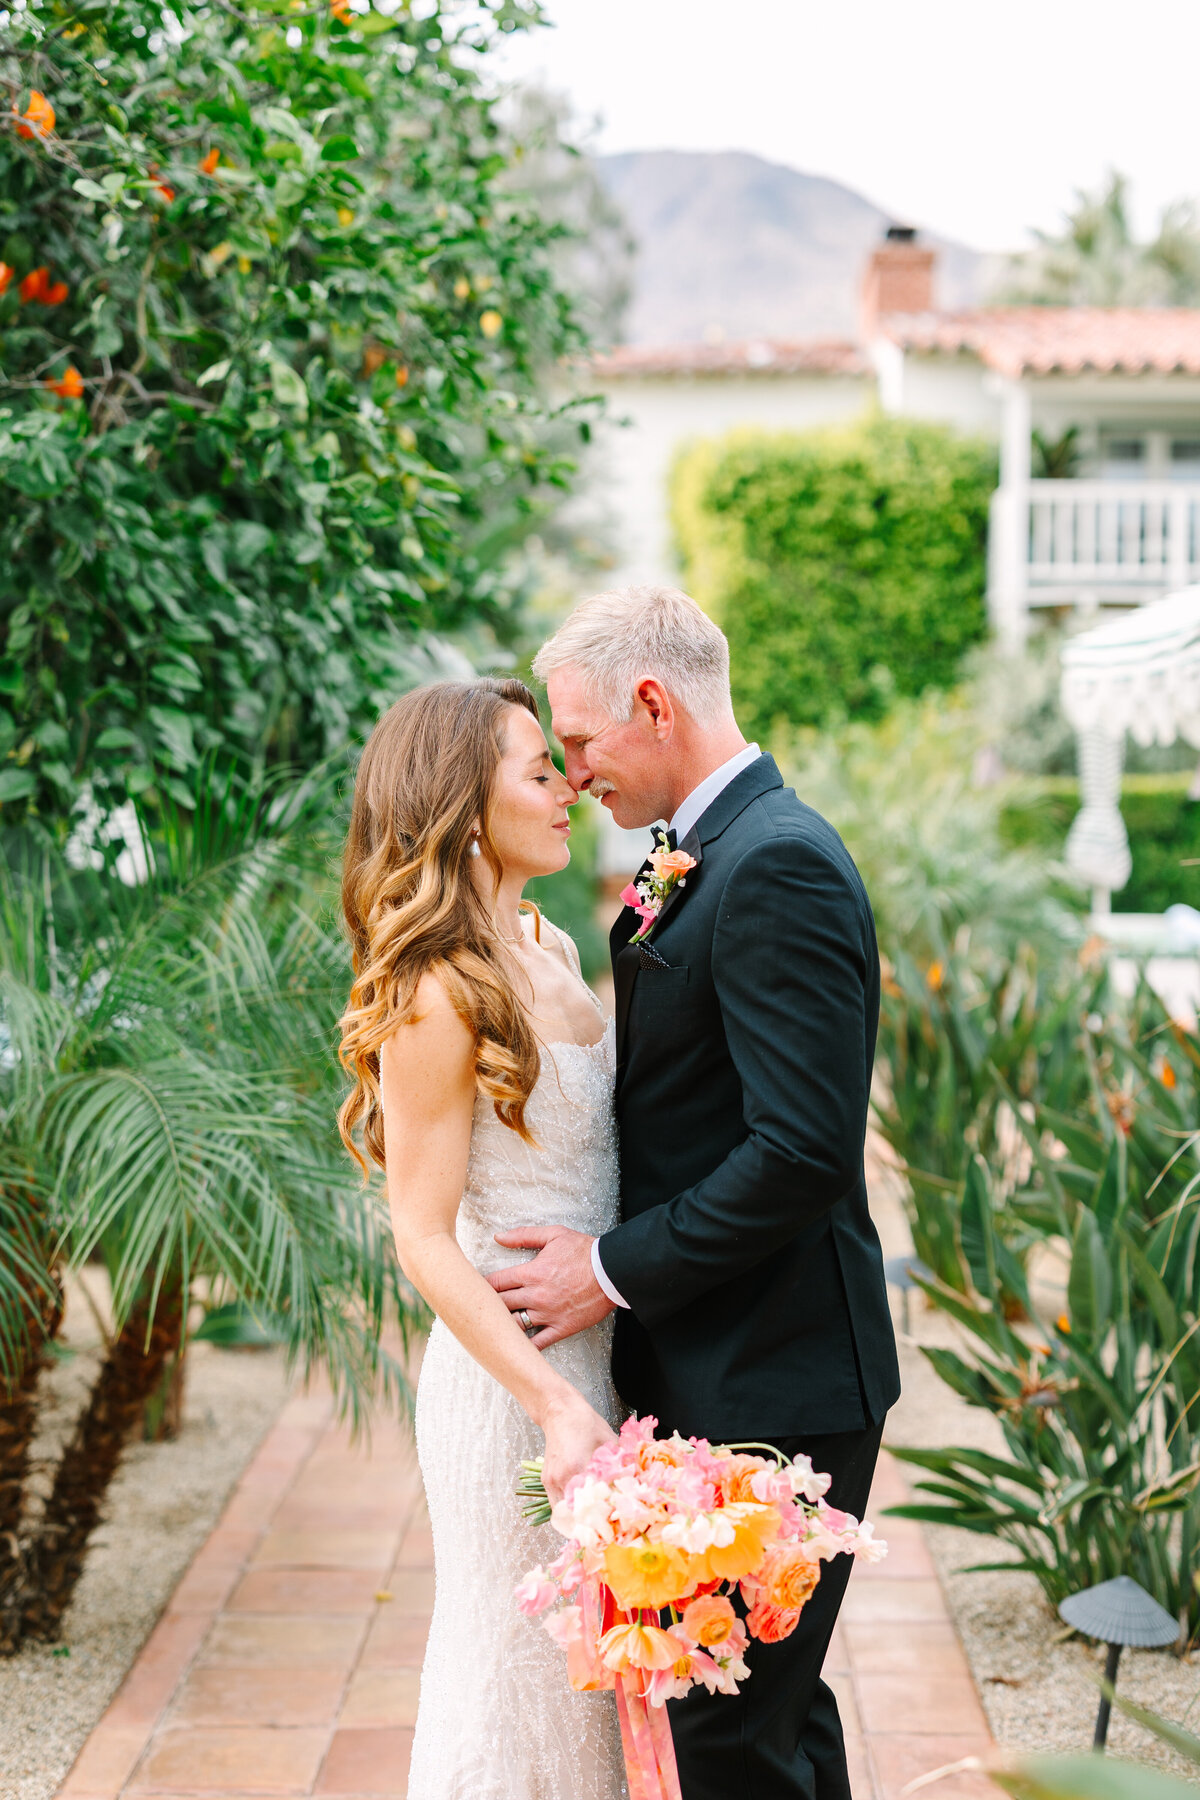 bride and groom embracing outside under the trees while bride holds orange and soft pink bridal bouquet.